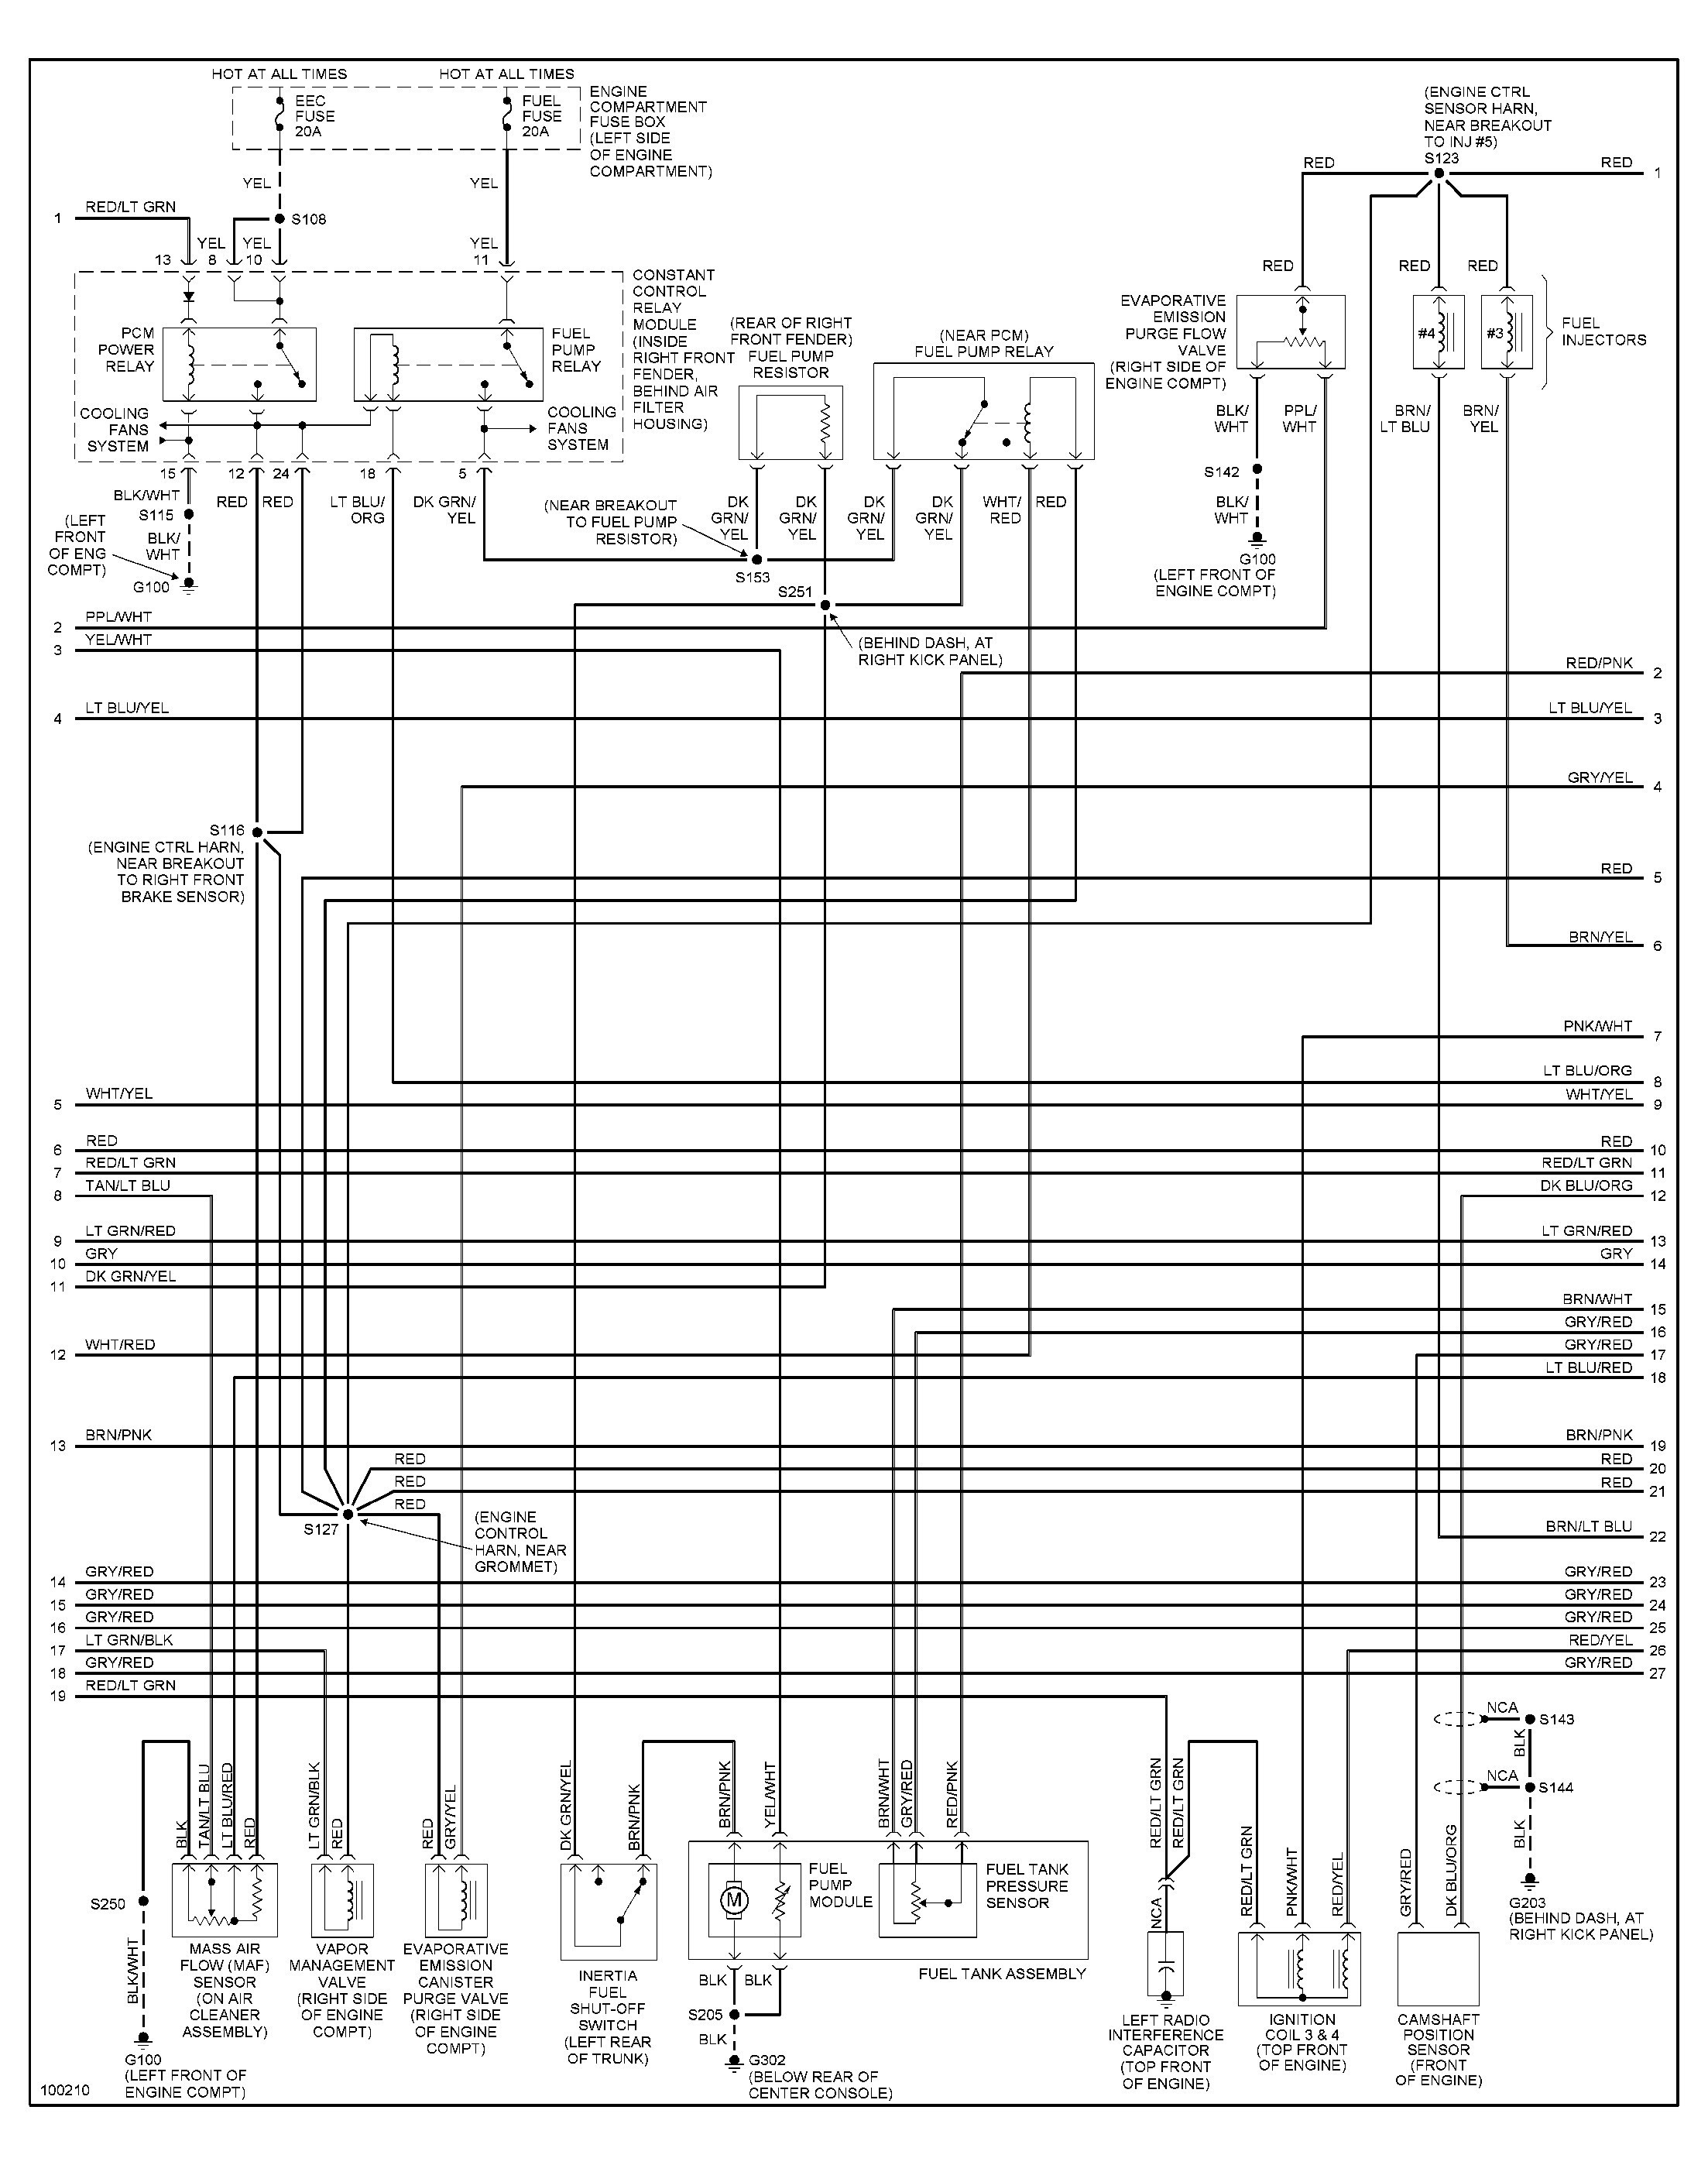 Wiring Diagram For 1997 Ford Mustang from lh5.googleusercontent.com